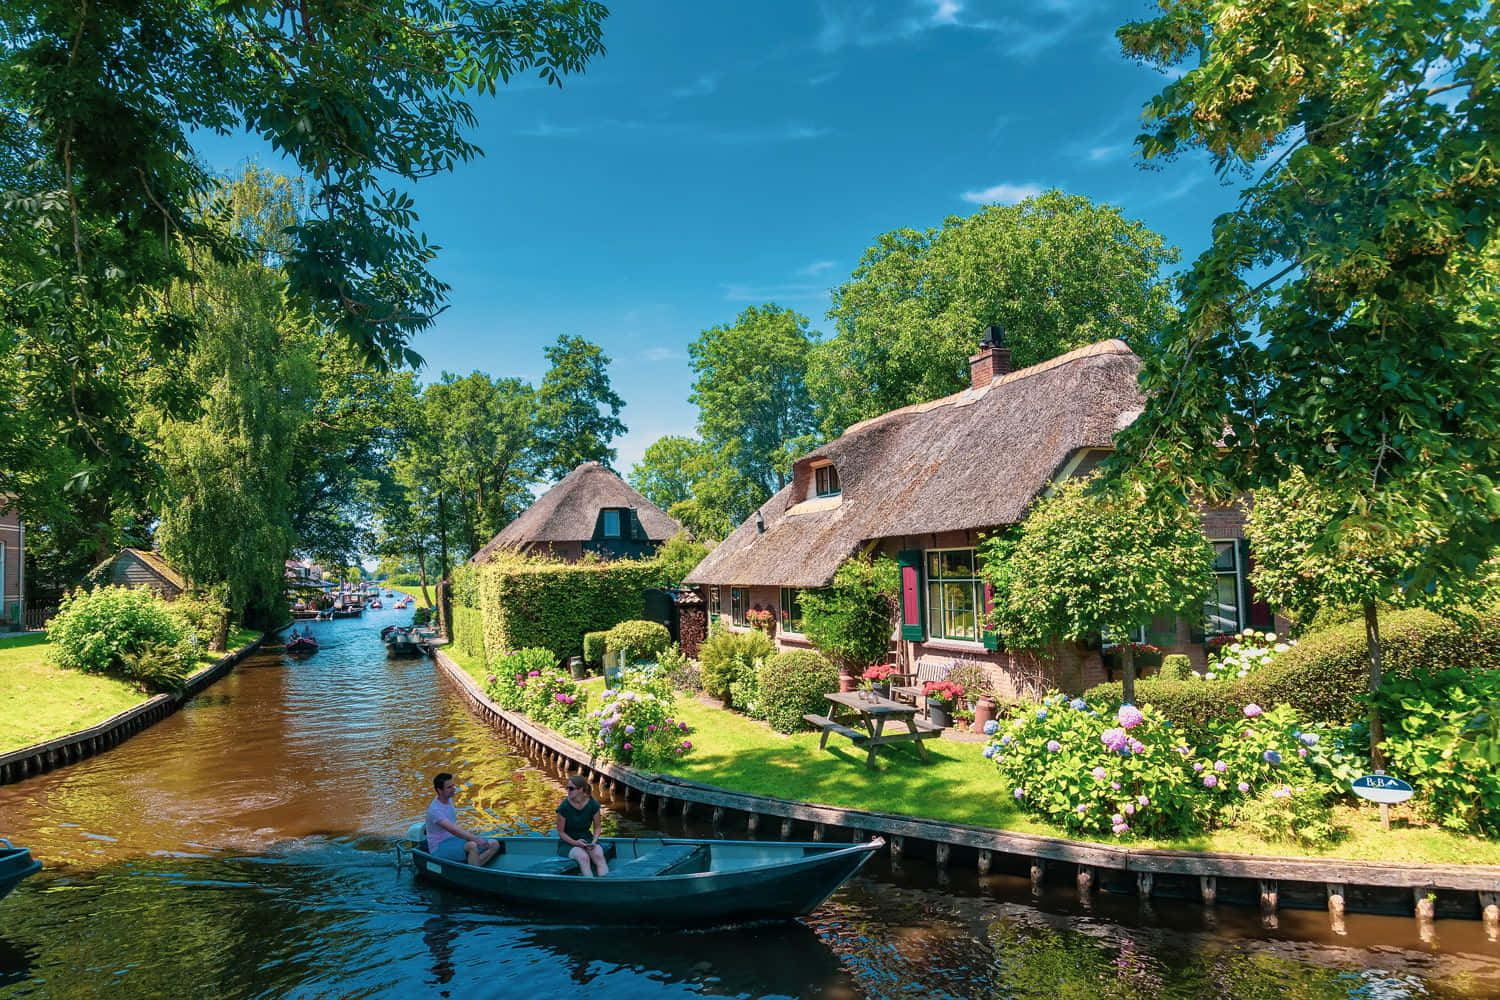 Enjoy the scenic beauty of the Netherlands